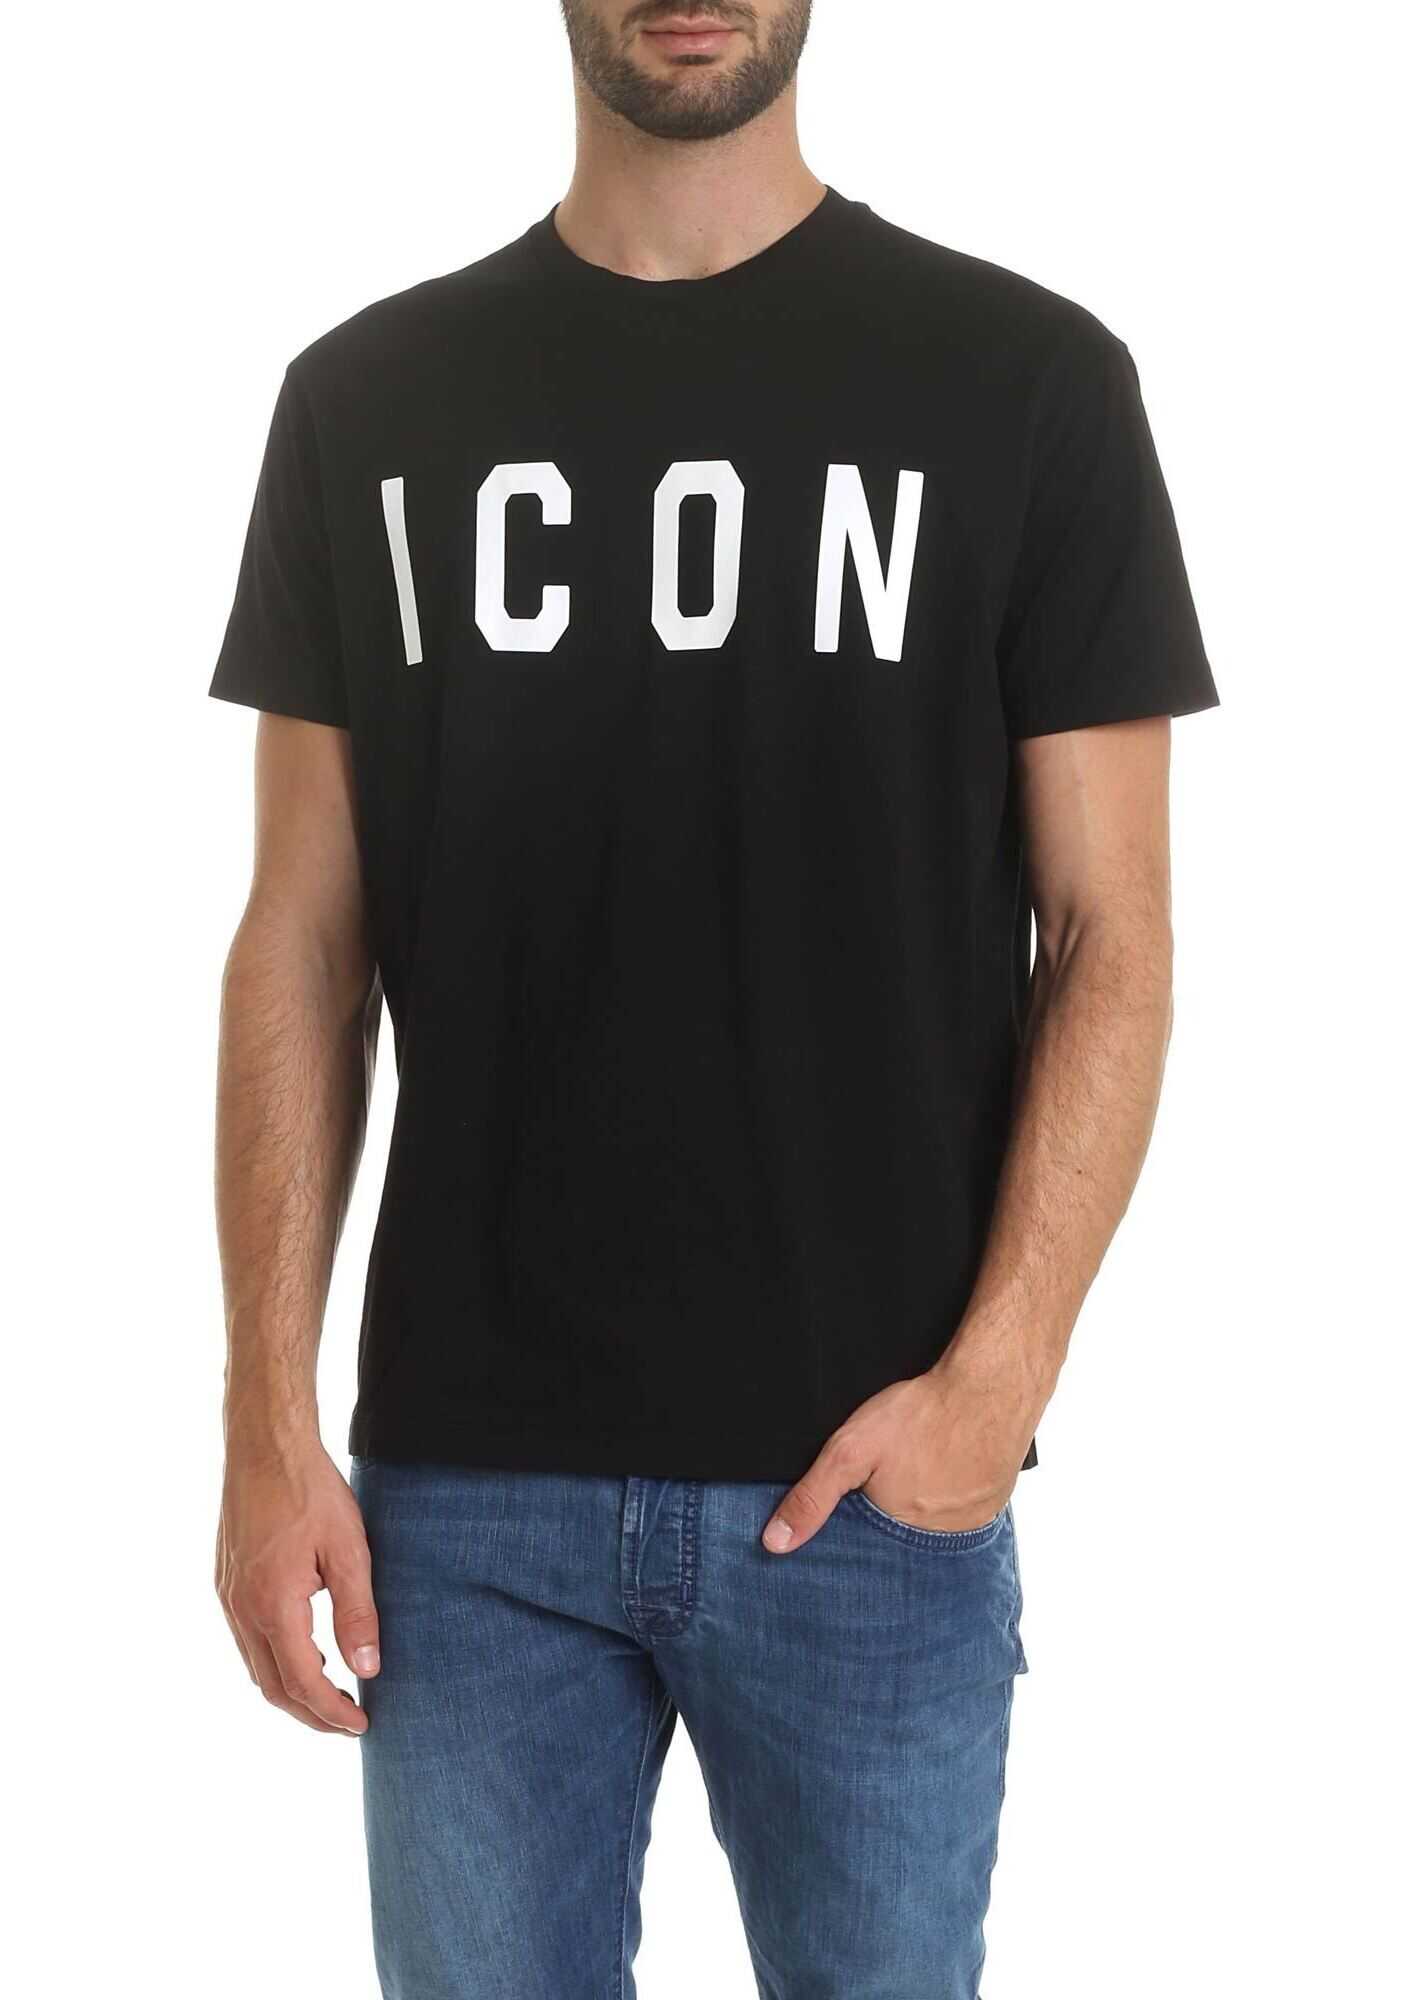 DSQUARED2 Icon T-Shirt In Black Black